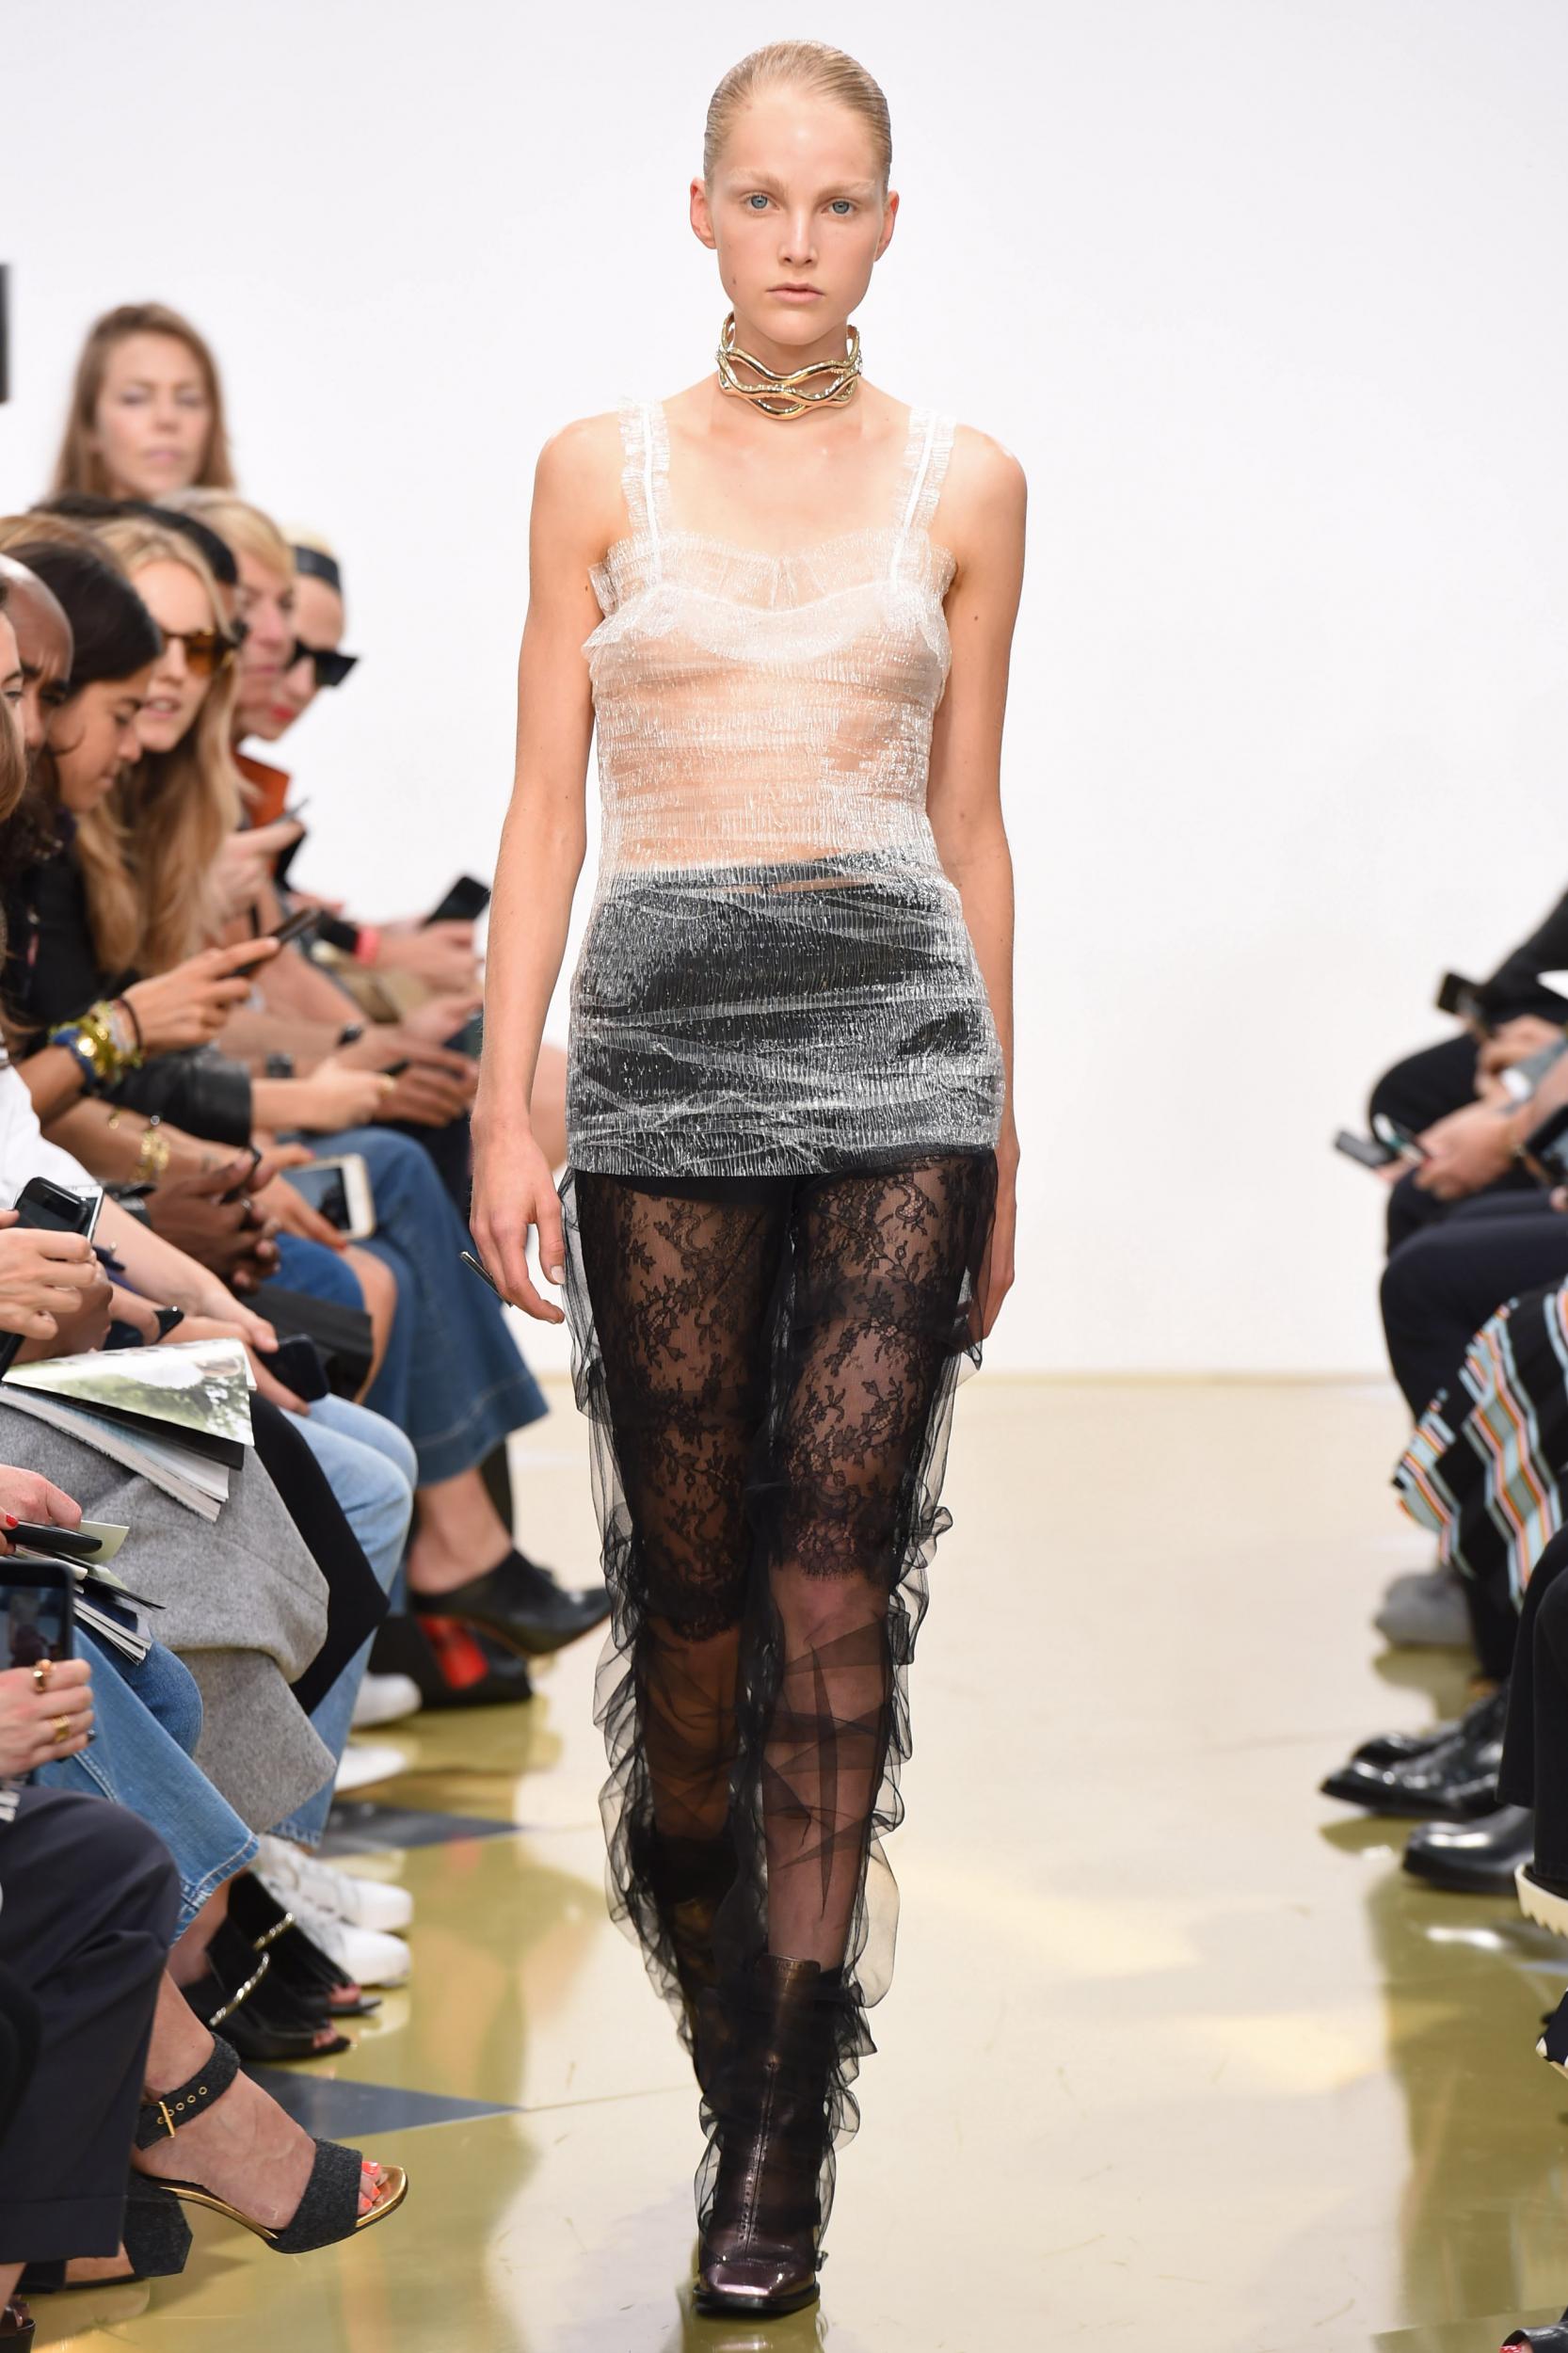 Ridiculous' transparent plastic trousers are back - and fashion